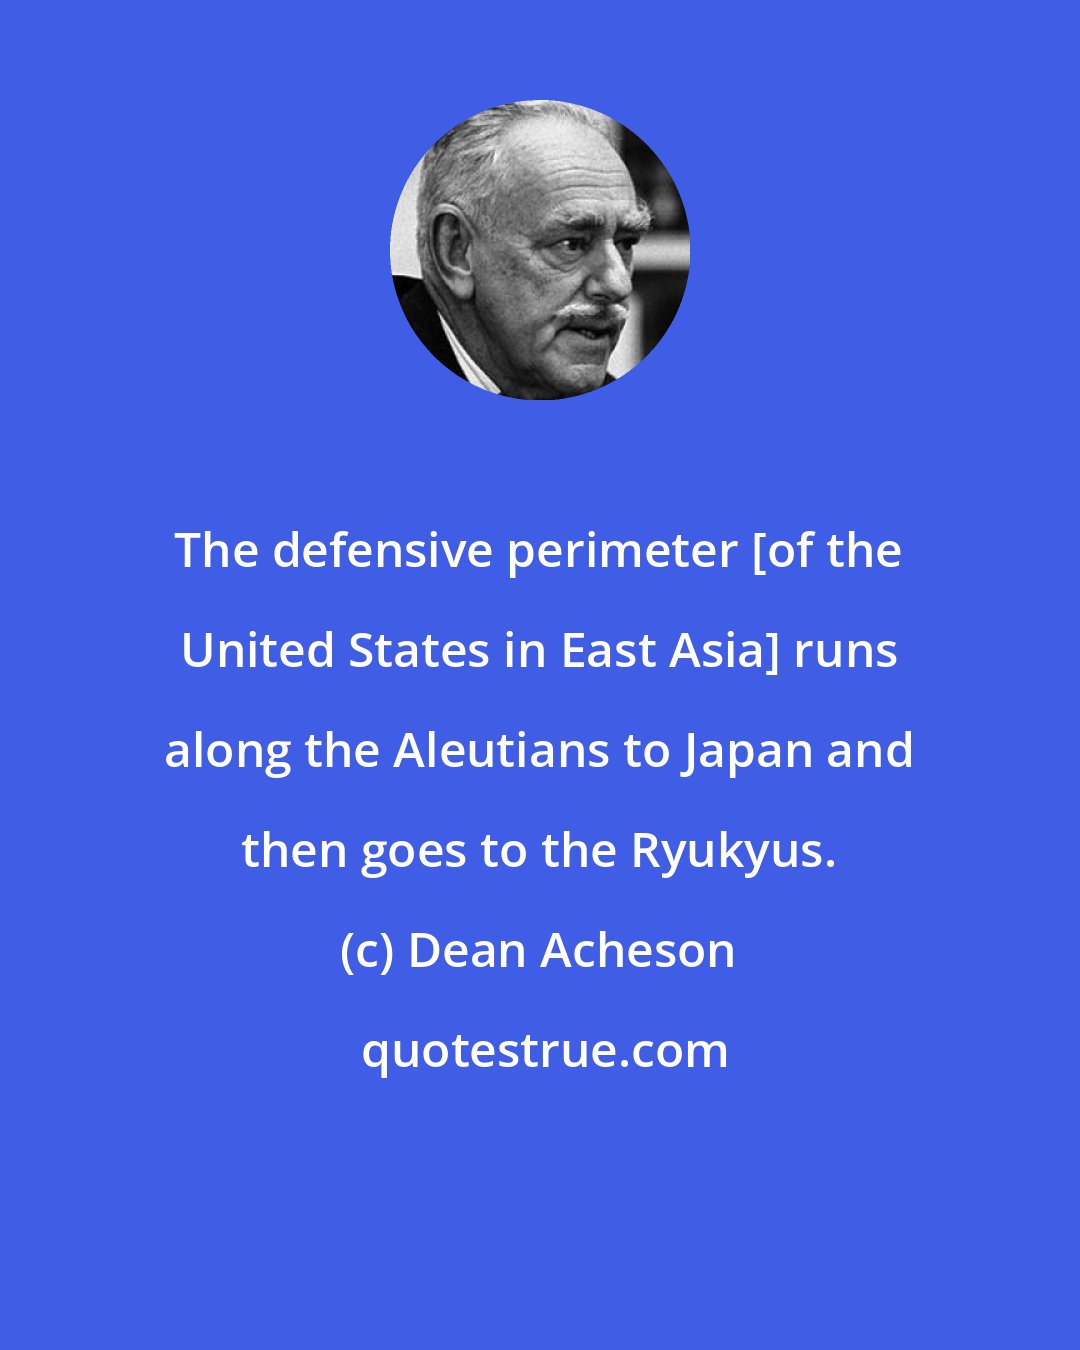 Dean Acheson: The defensive perimeter [of the United States in East Asia] runs along the Aleutians to Japan and then goes to the Ryukyus.